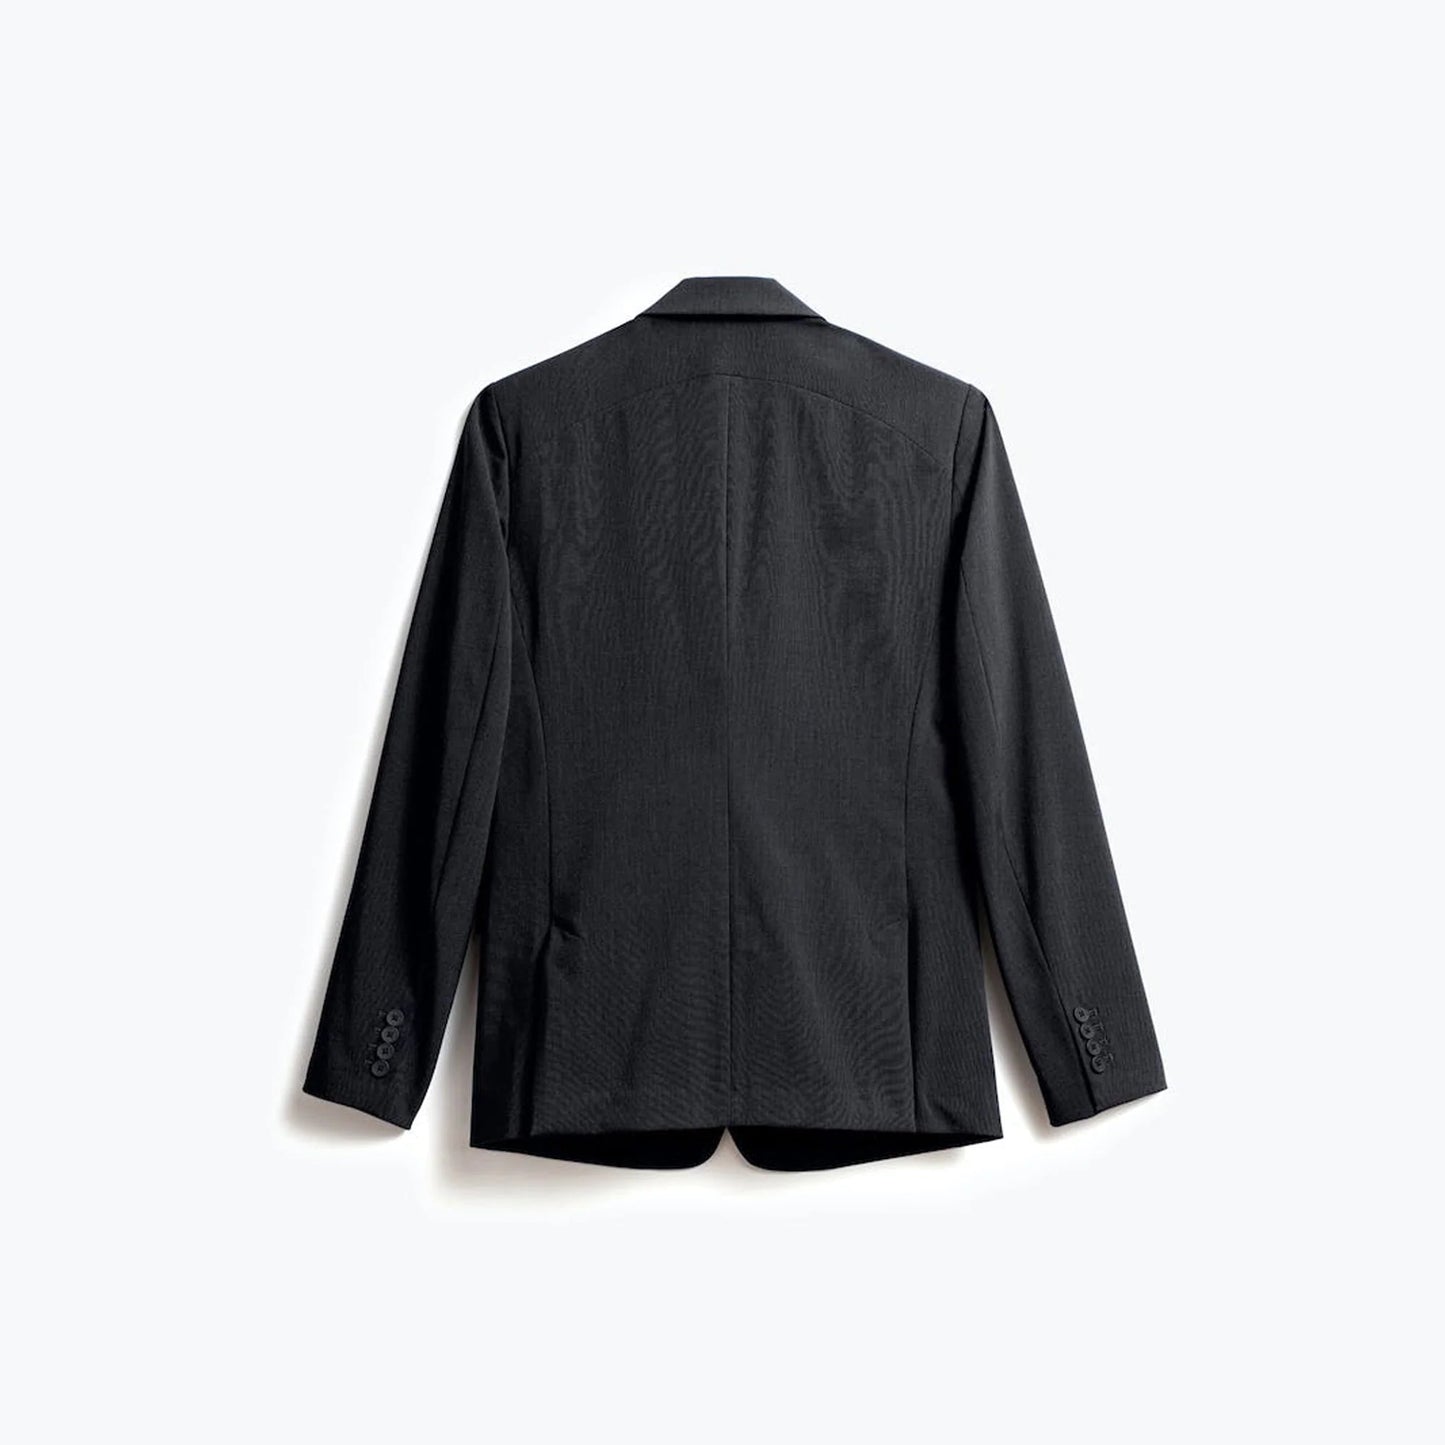 MINISTRY OF SUPPLY VELOCITY SUIT JACKET IN DARK CHARCOAL